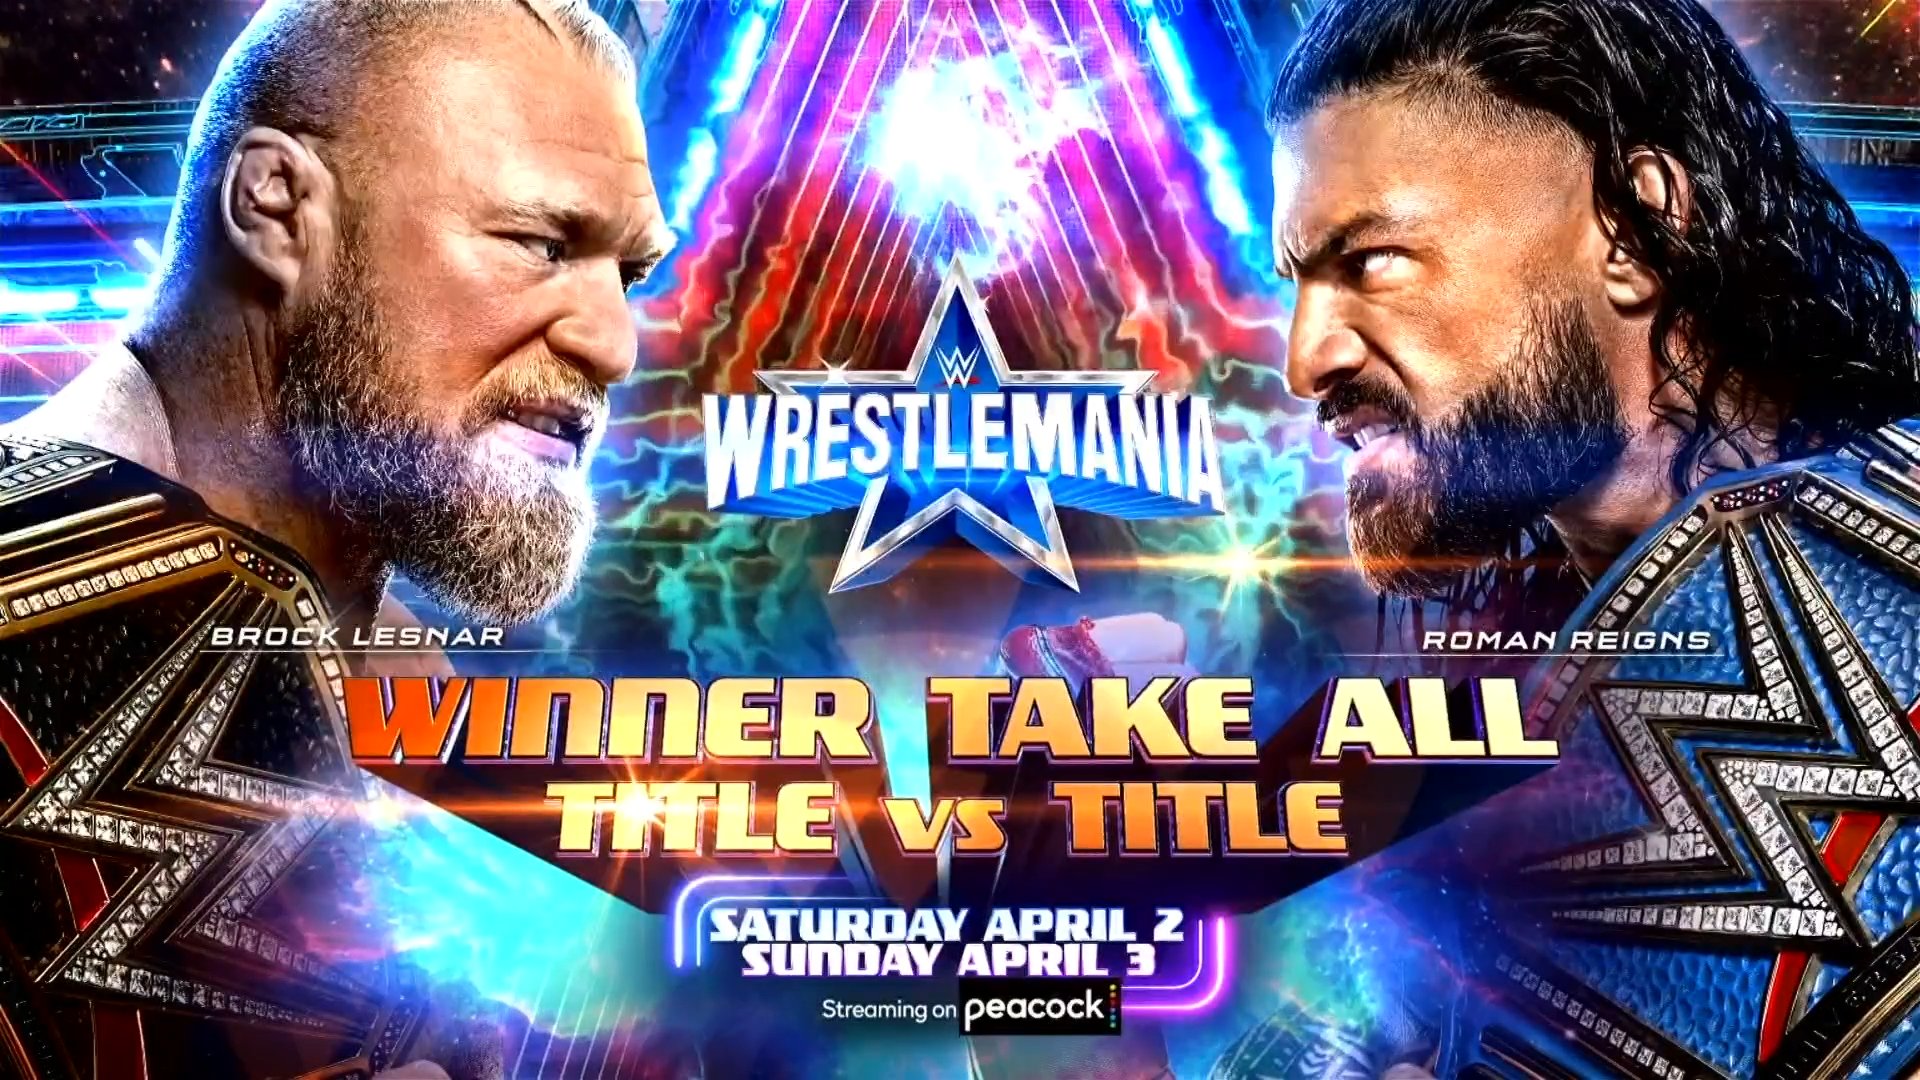 Popular annual professional wrestling event "WWE WrestleMania" to be